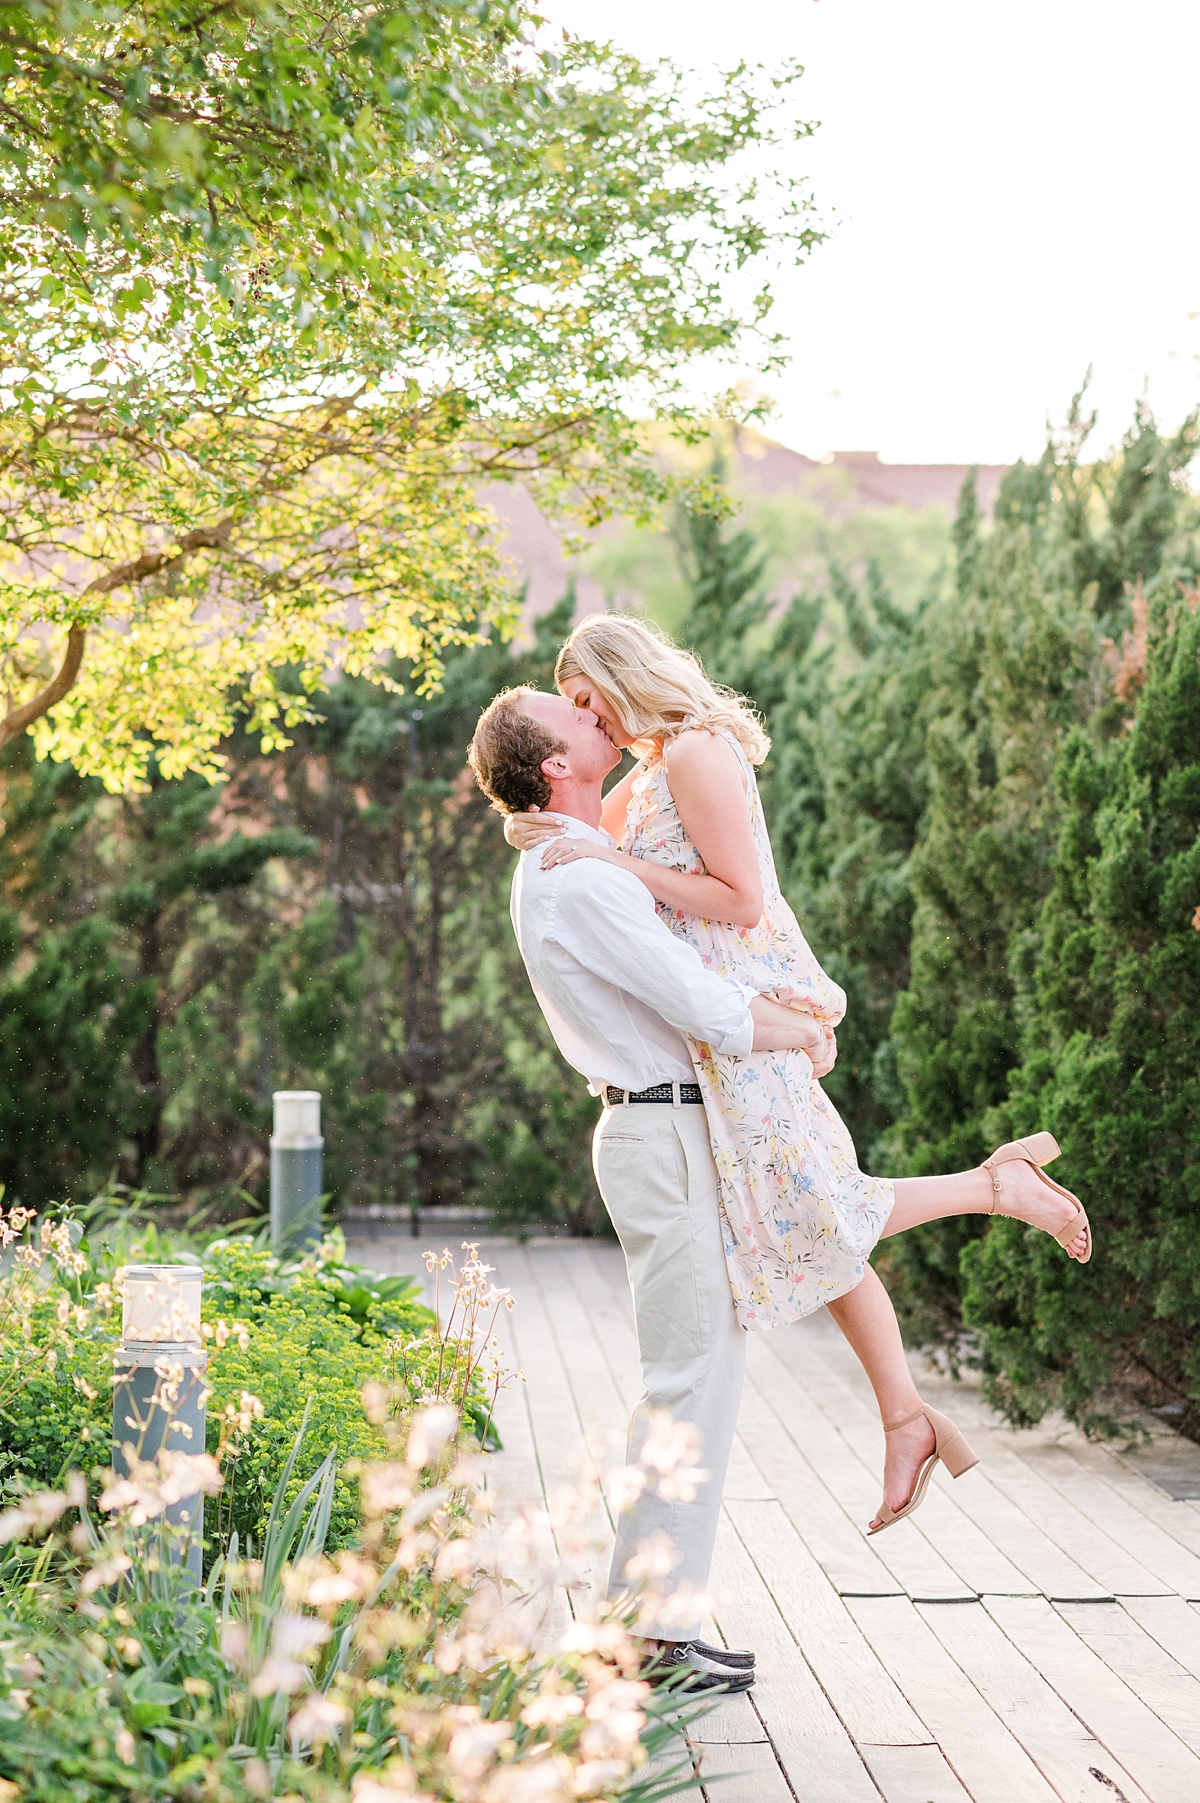 Stunning scissor kick kiss portrait during spring engagement session at the VMFA in downtown Richmond. Photography by Virginia wedding photographer Kailey Brianne Photography. 